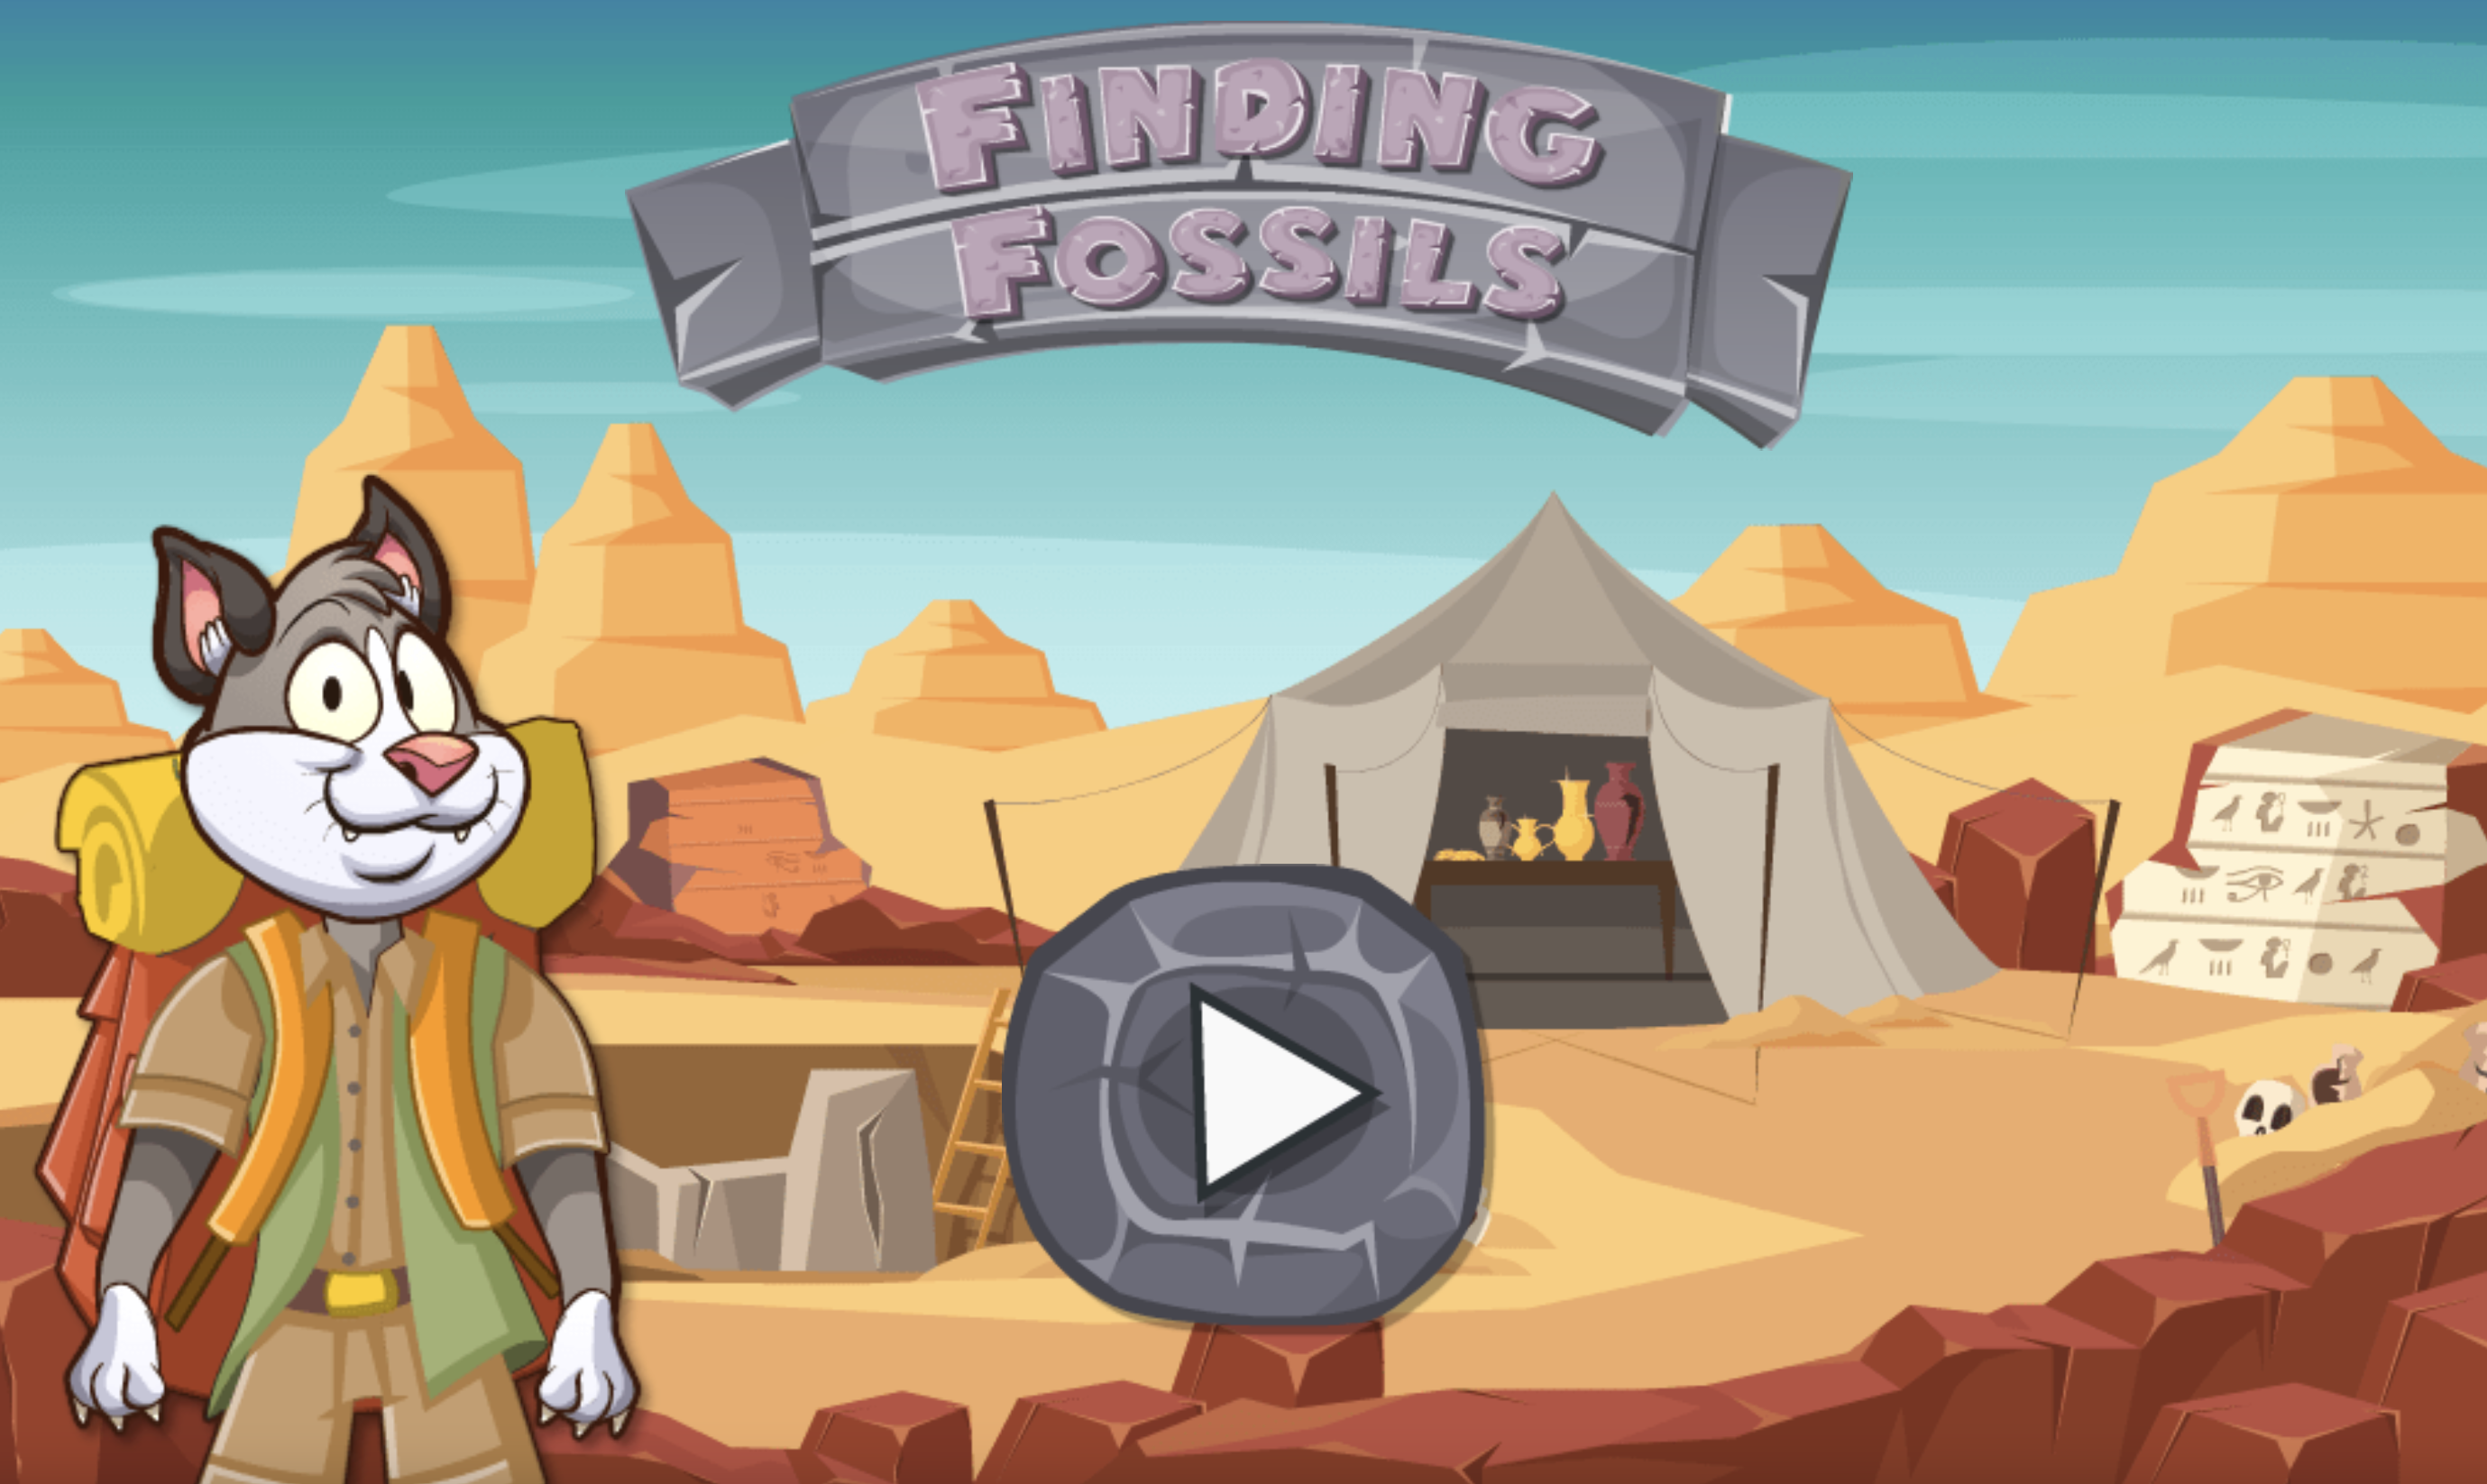 Finding Fossils game